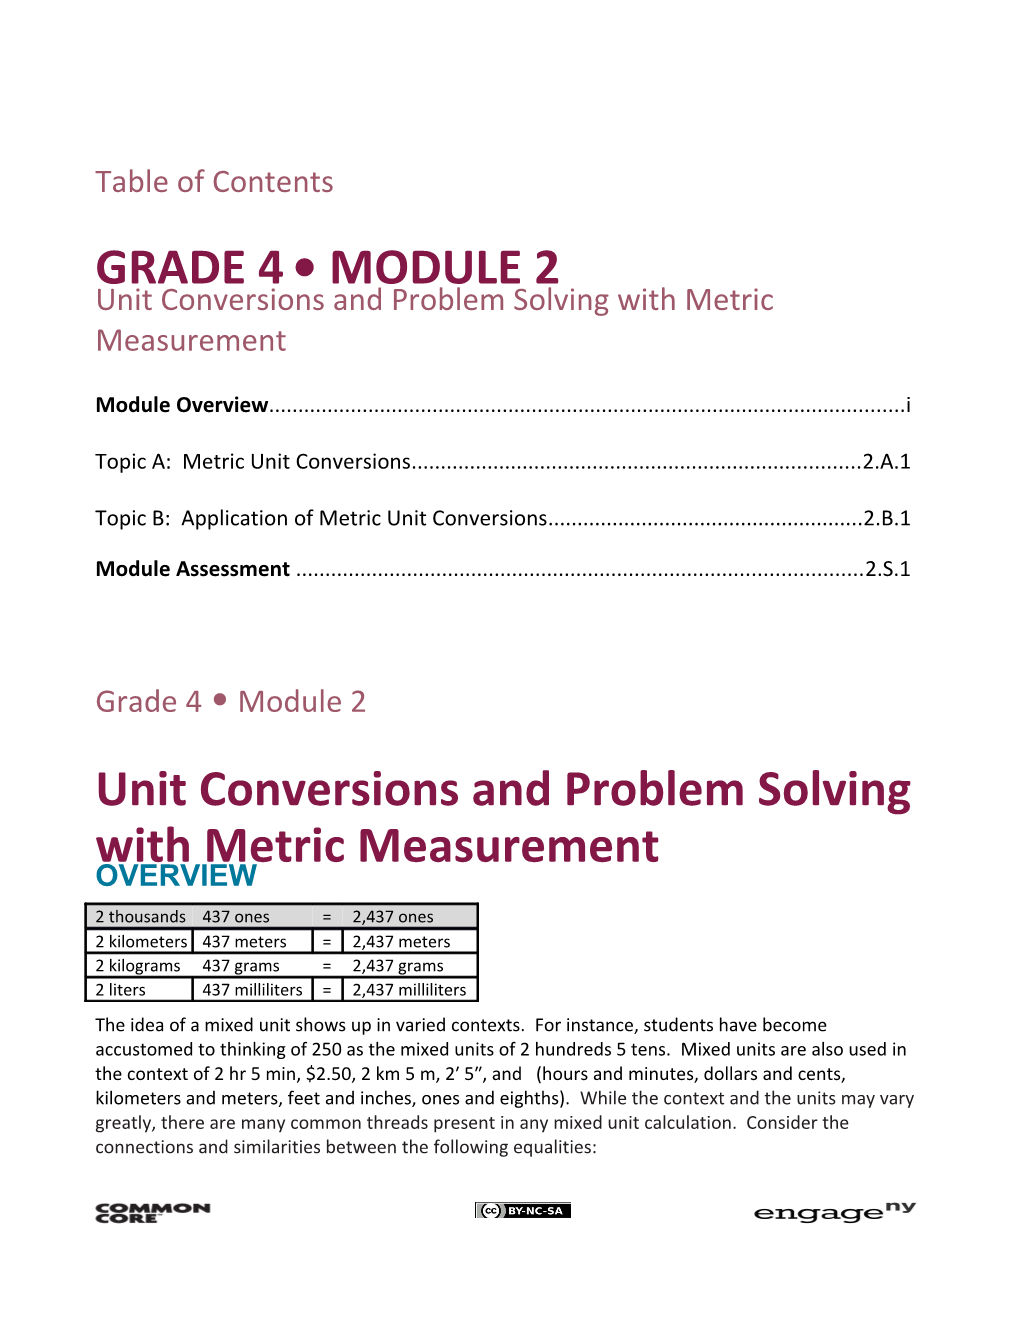 Unit Conversions and Problem Solving with Metric Measurement